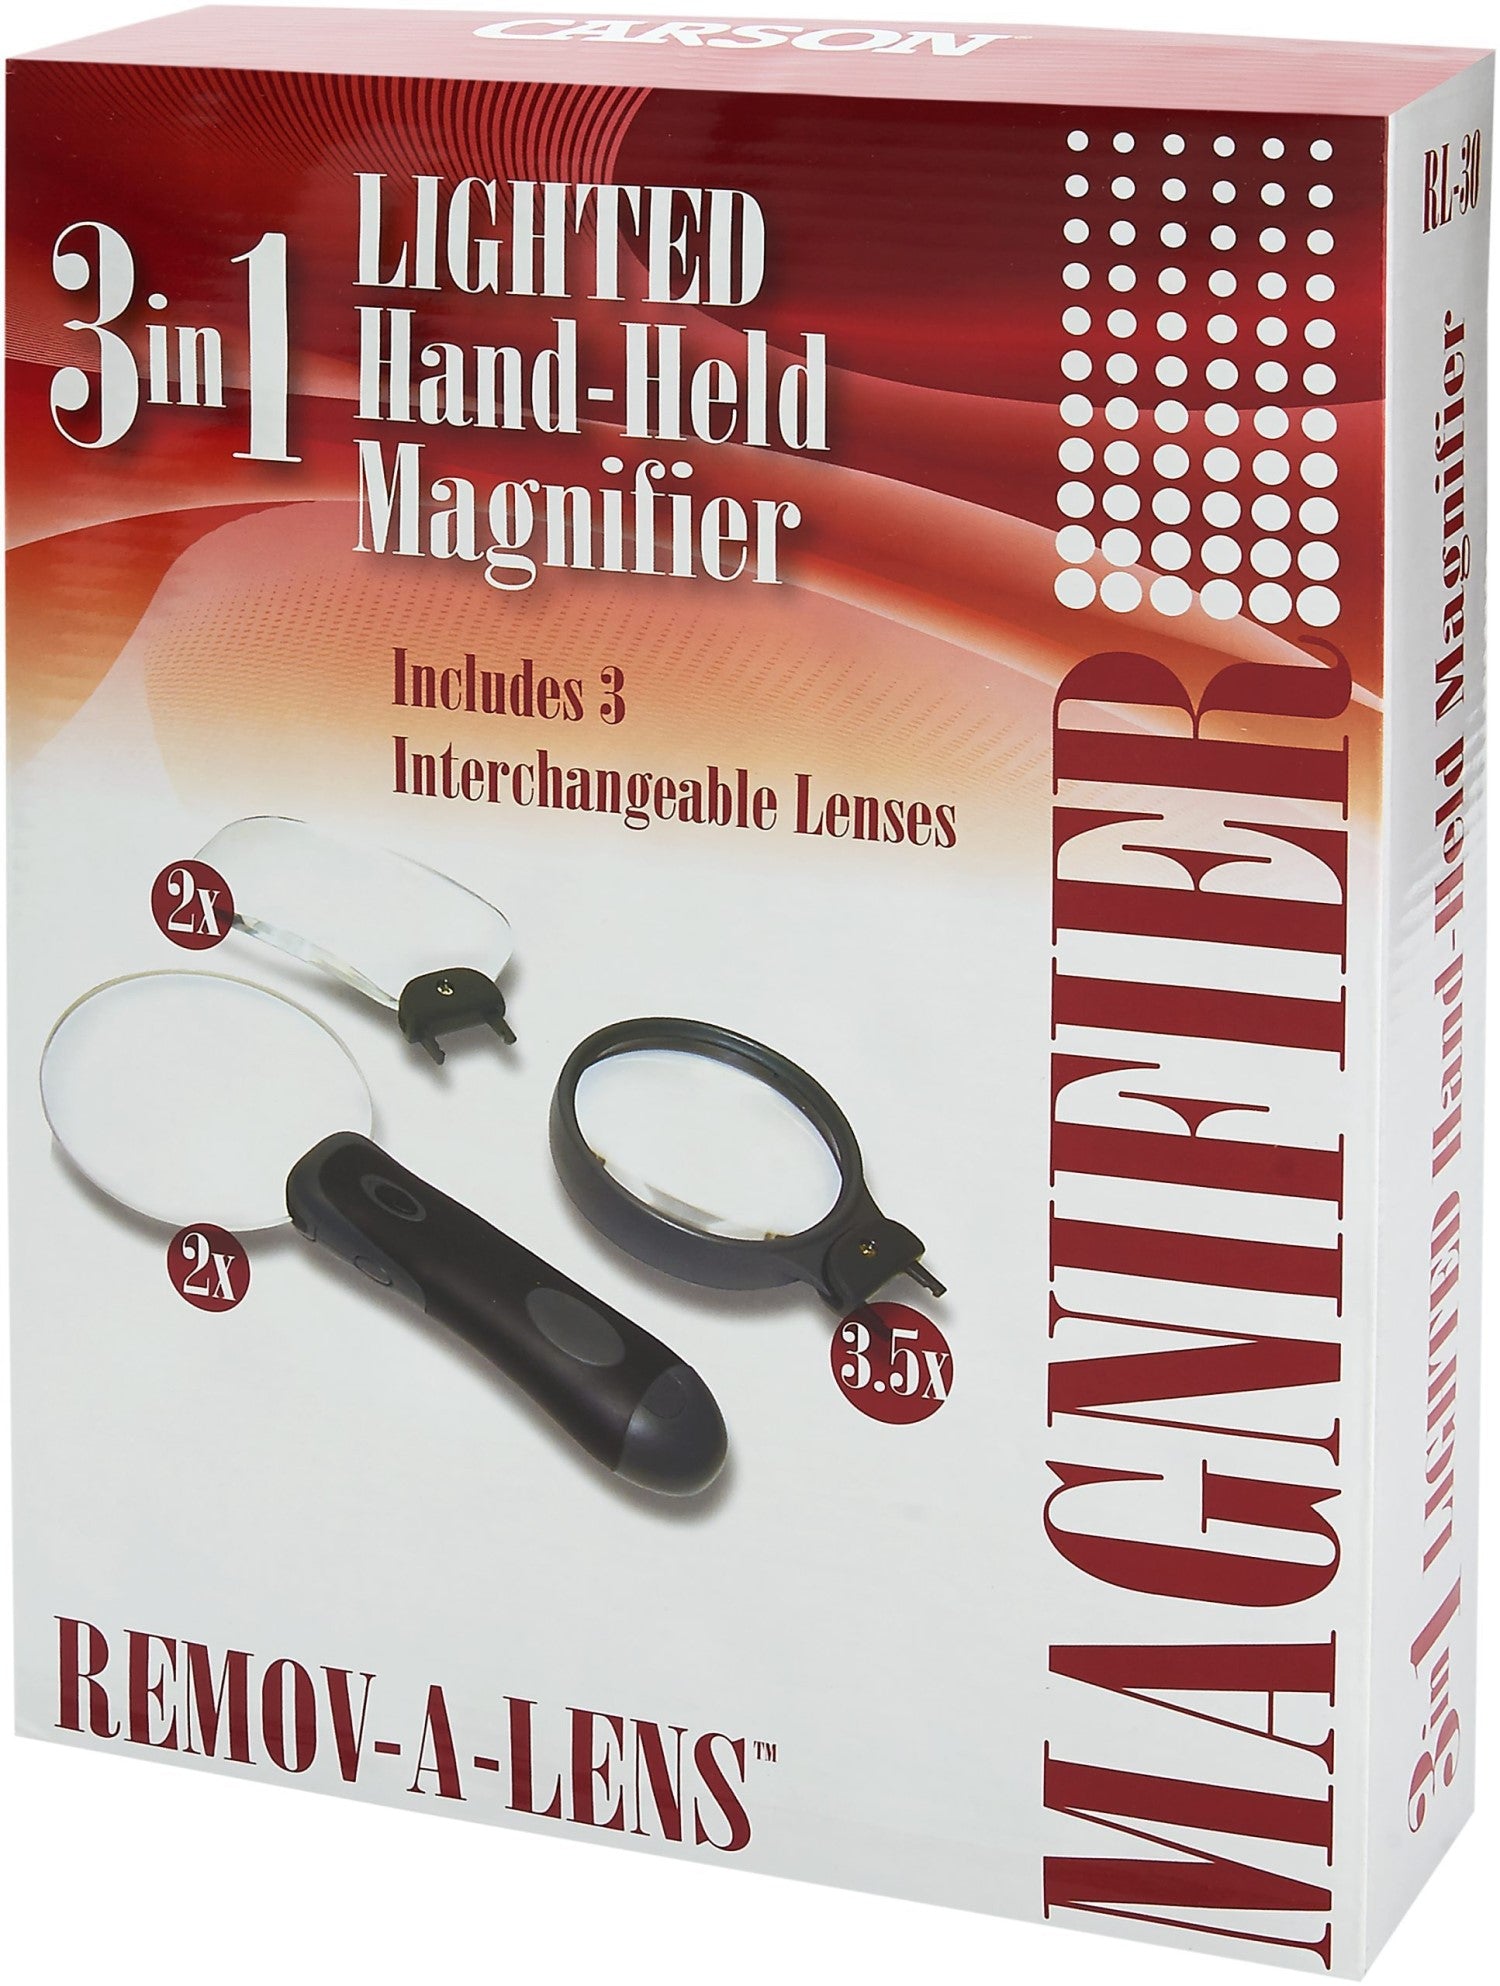 Image of the packaging that the Remov-A-Lens™ comes in.